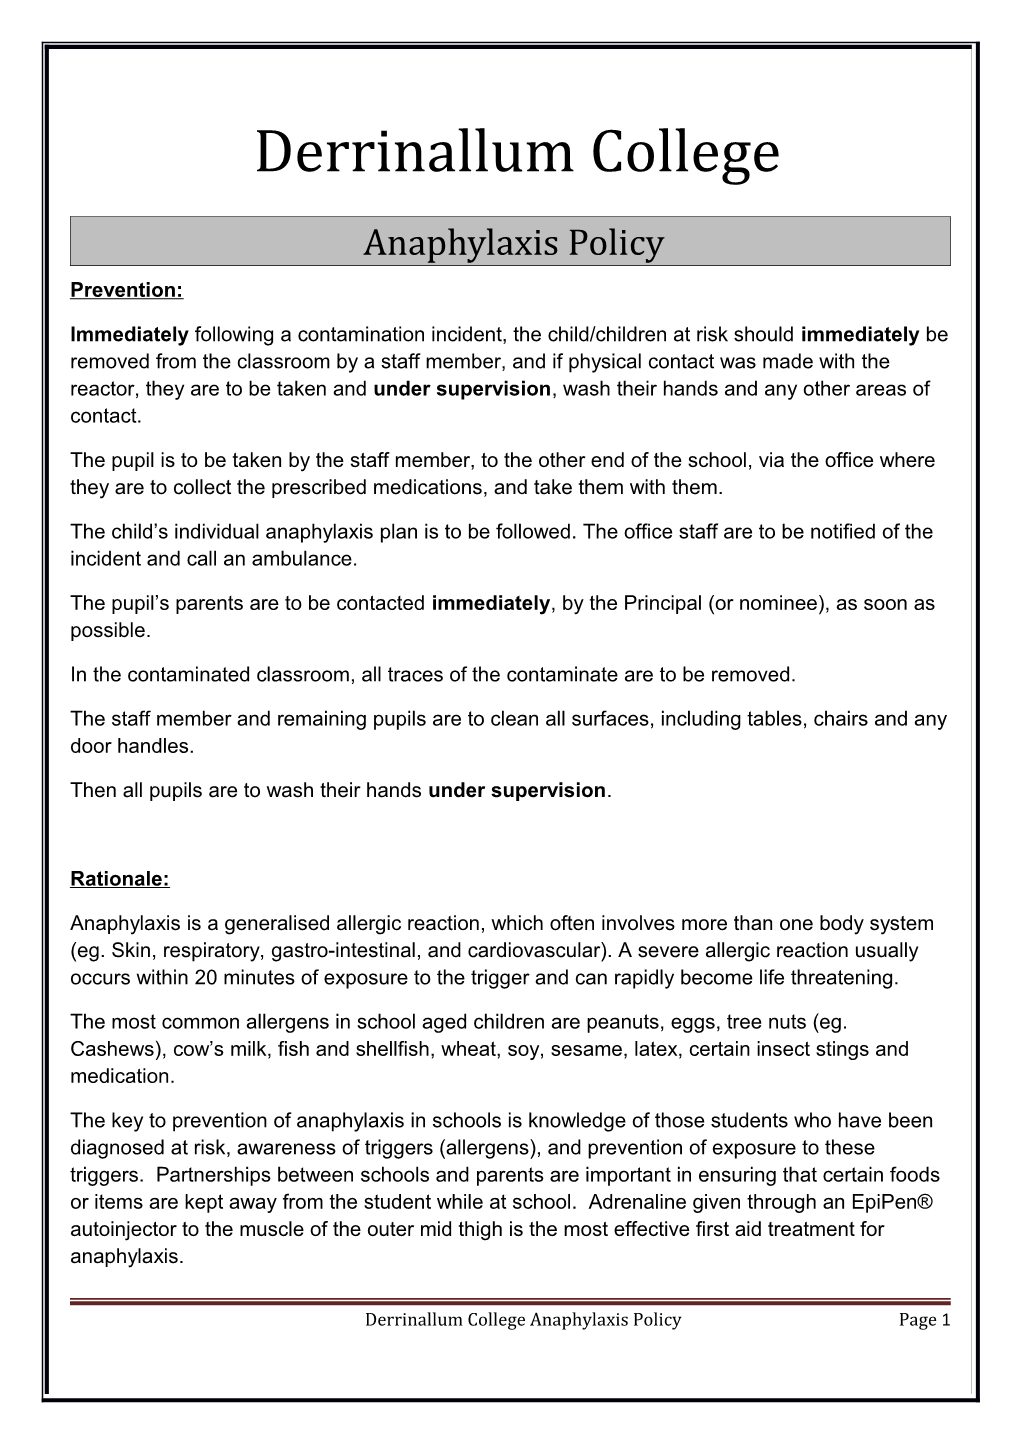 Anaphylaxis Policy